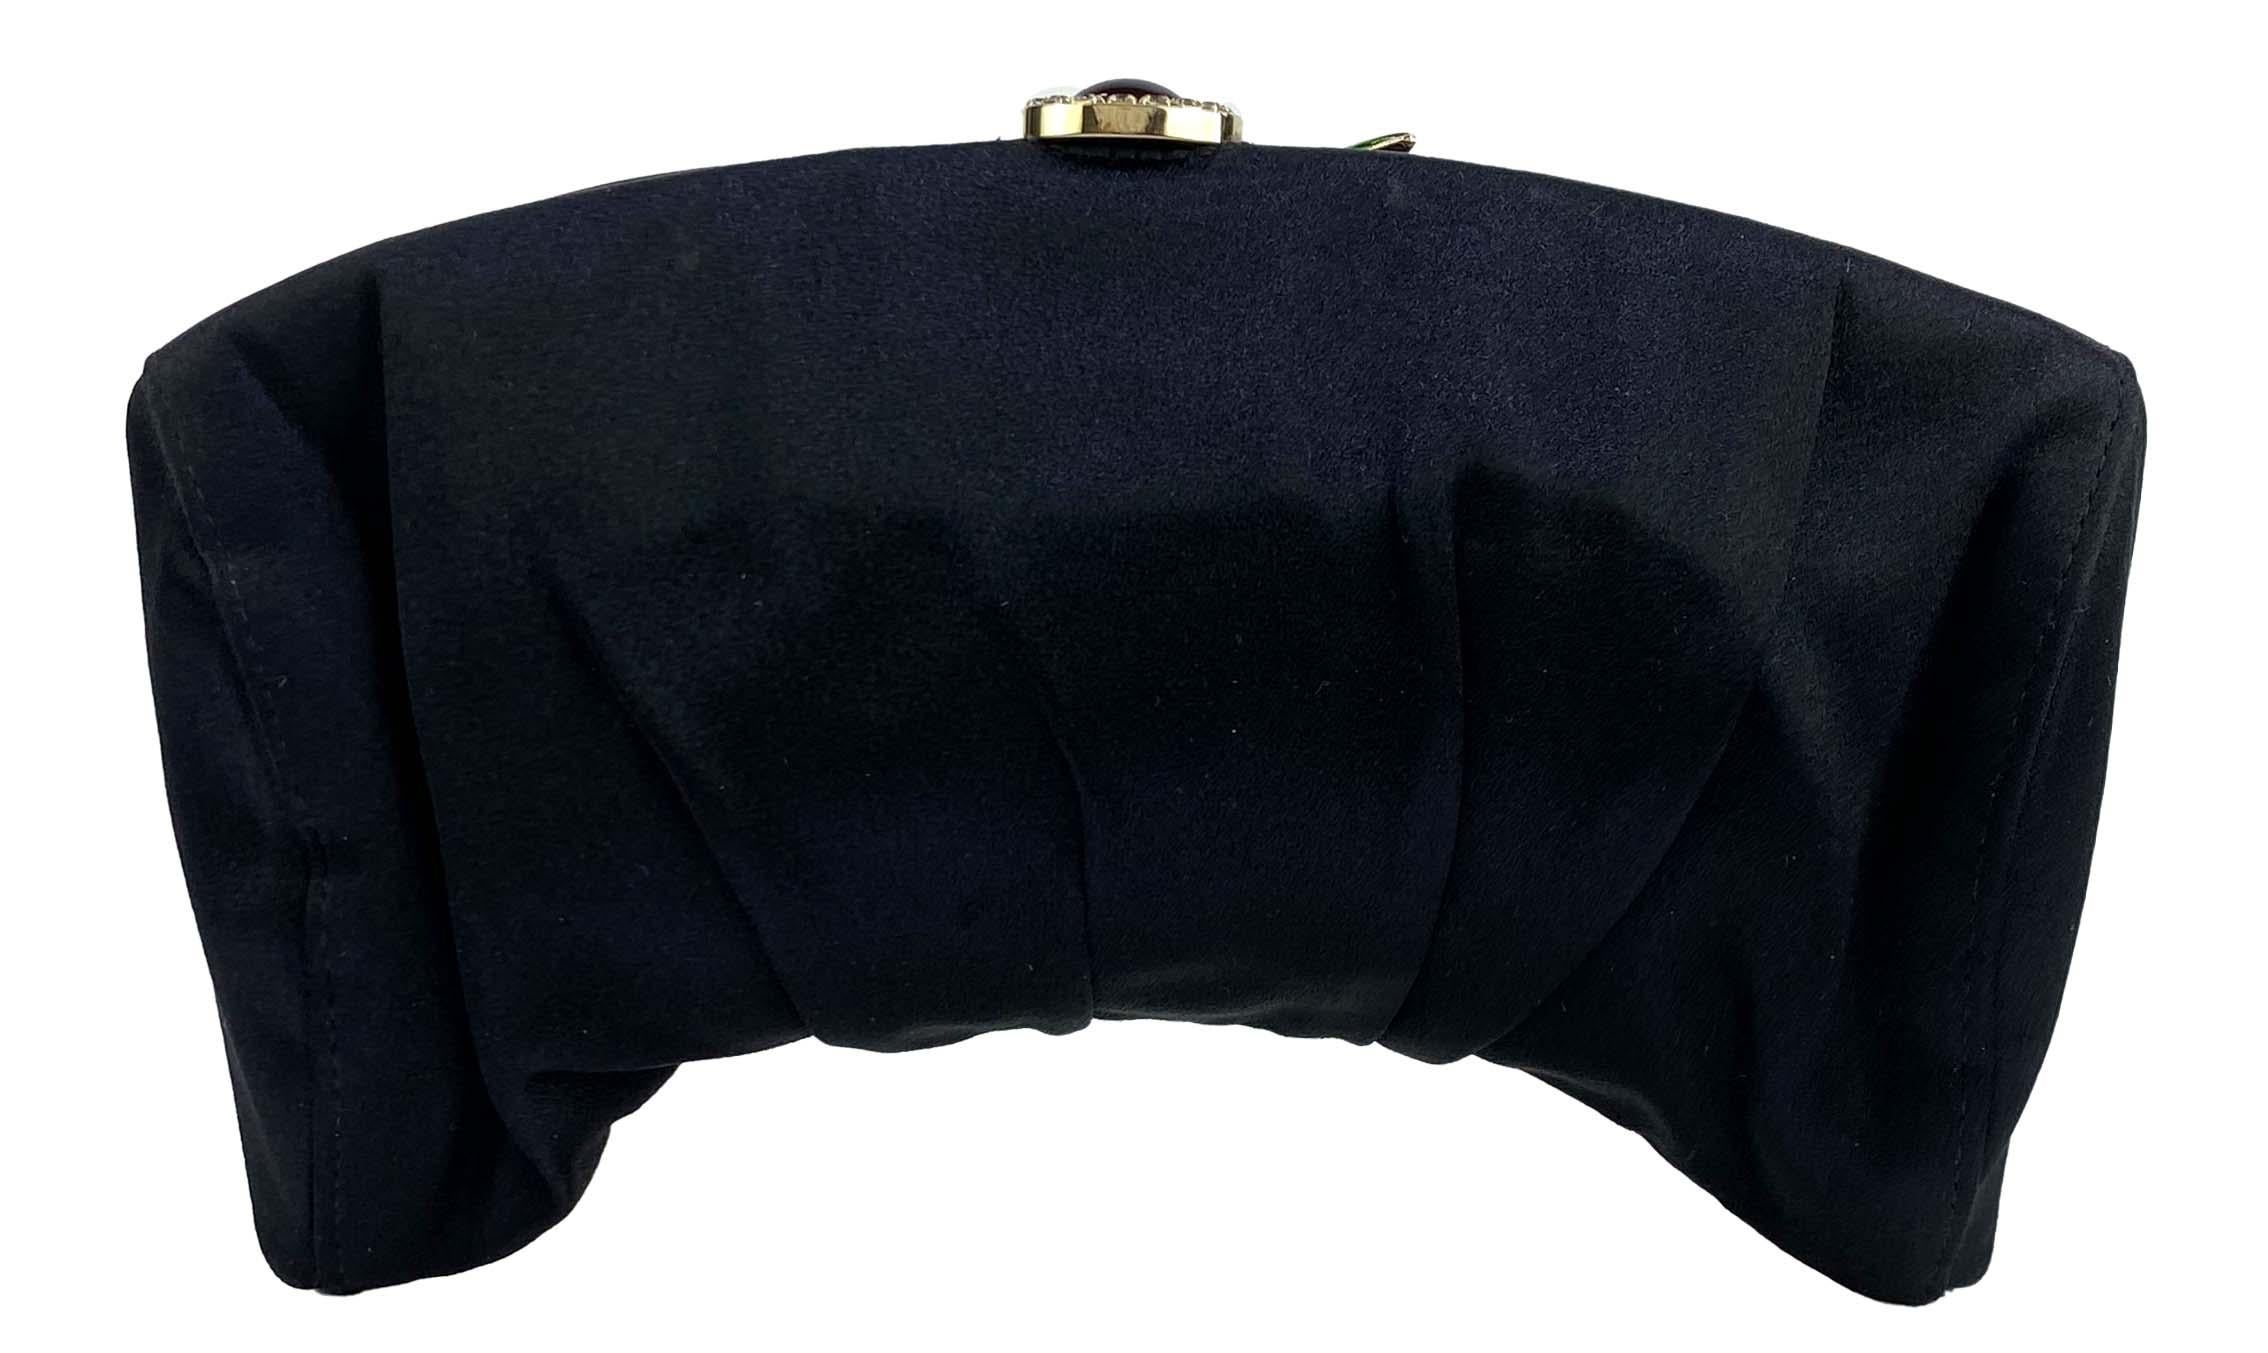 S/S 2004 Yves Saint Laurent by Tom Ford Rhinestone Flower Silk Satin Clutch  In Excellent Condition For Sale In West Hollywood, CA